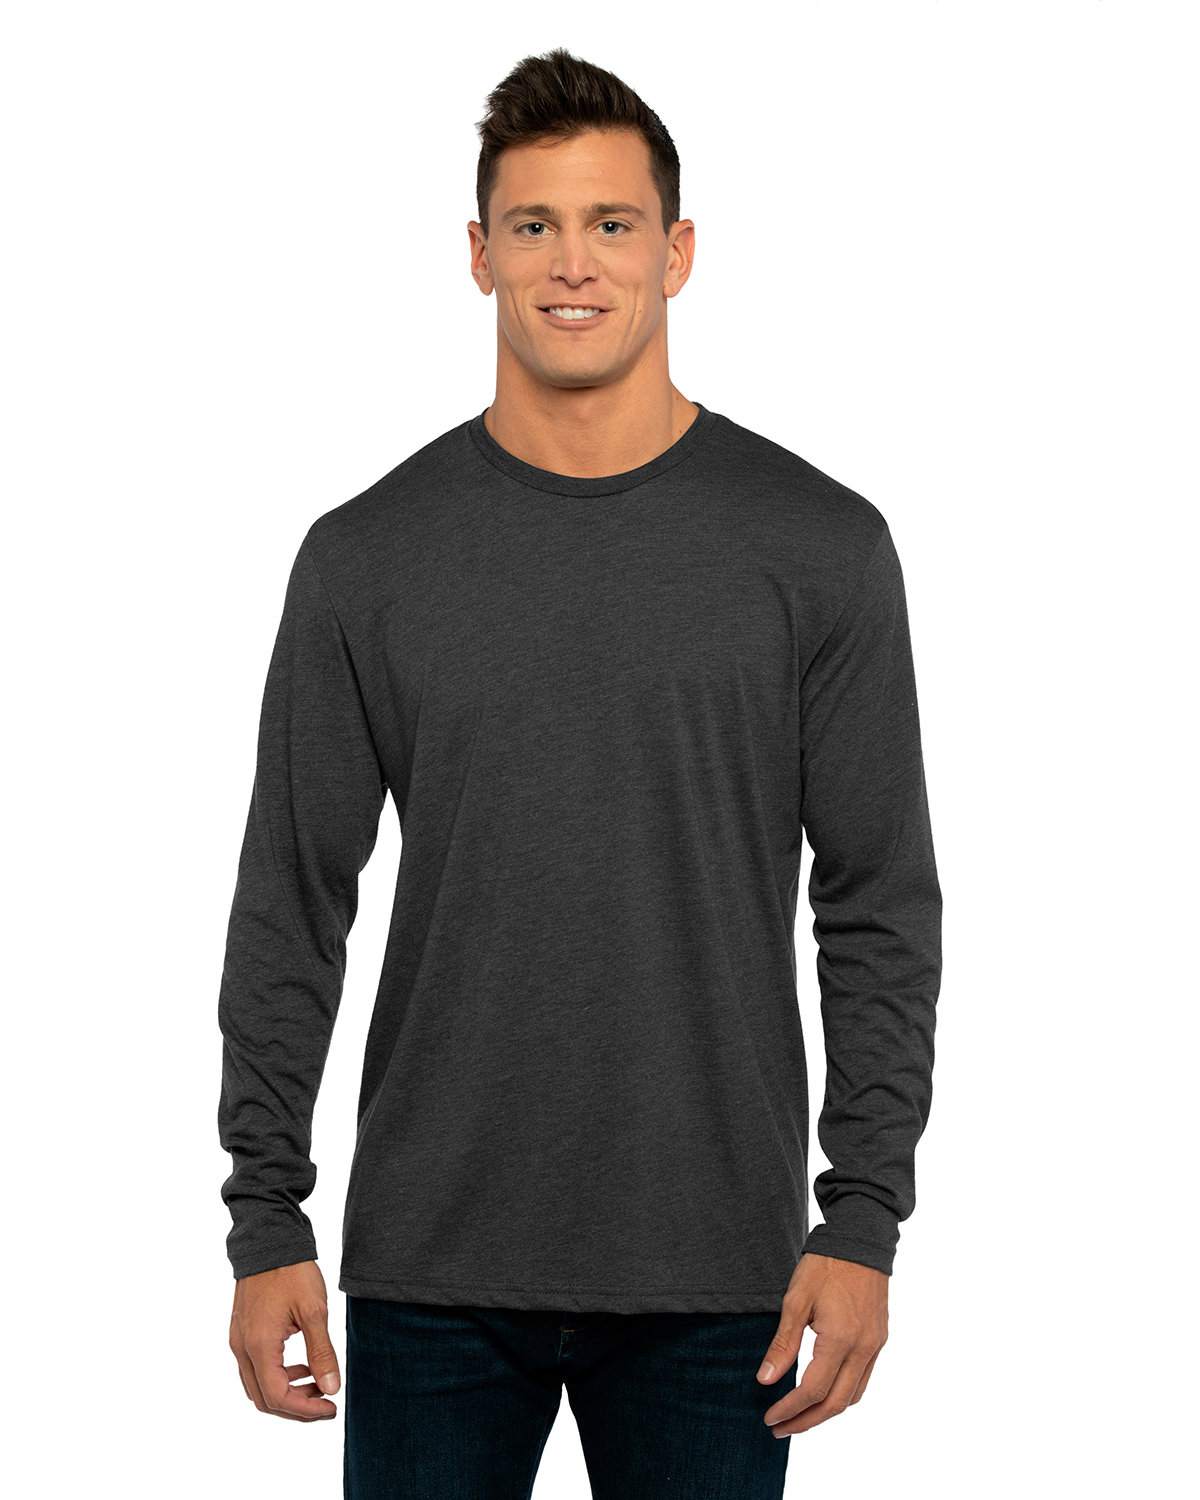 Next Level Mens Long Sleeve Thermal Shirt Pack of 2 Heather Charcoal M 